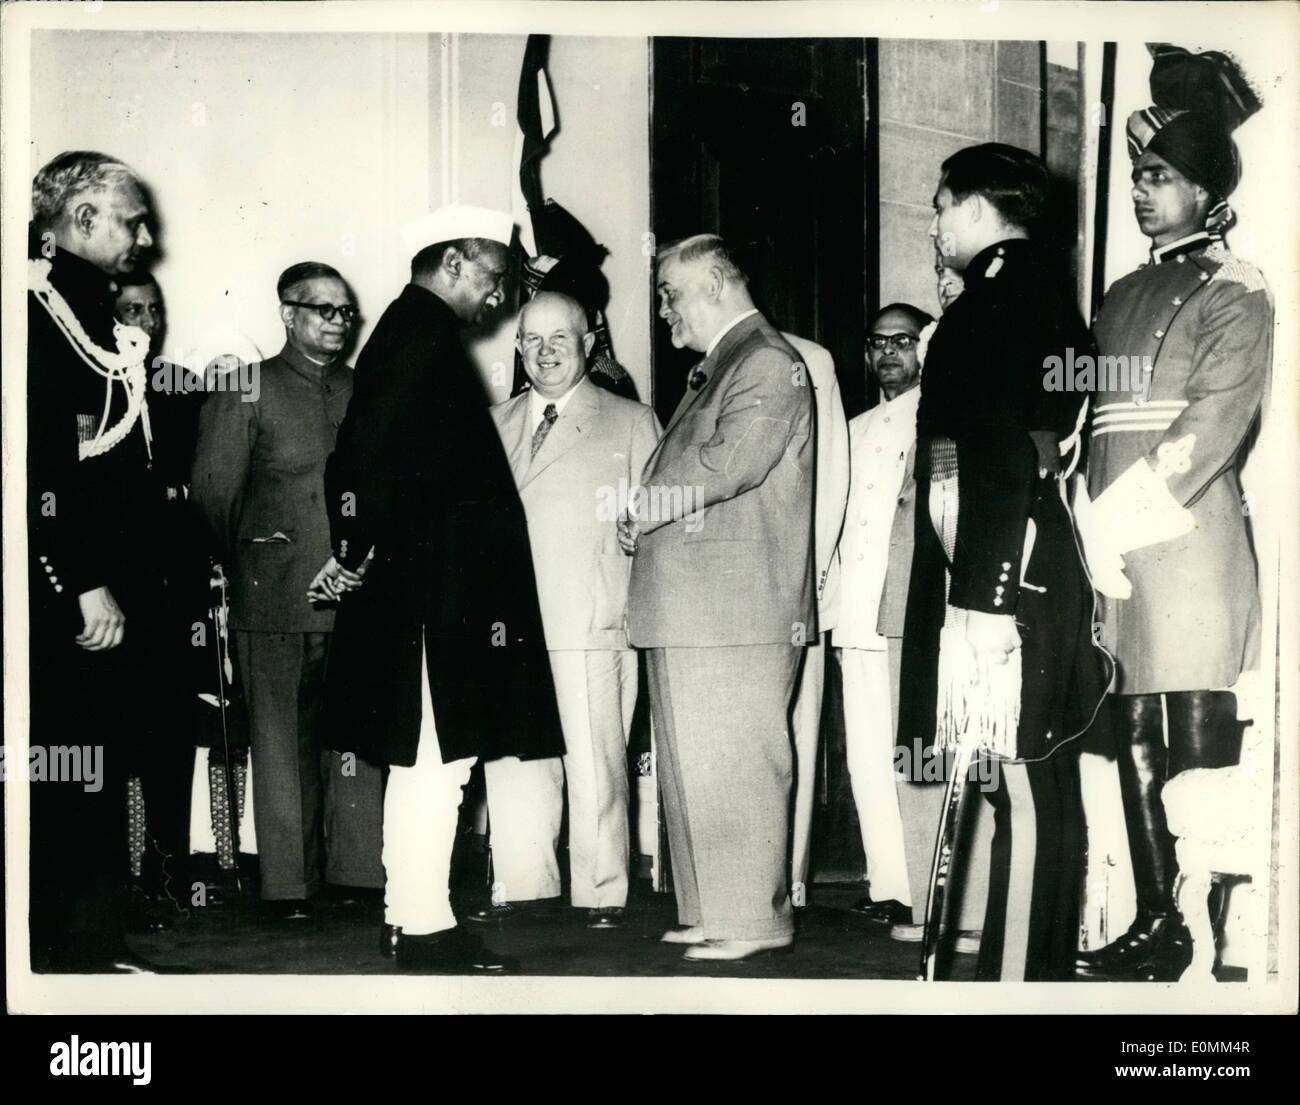 Nov. 11, 1955 - Soviet Bulganin Sight Seeing In Delhi.: Marshall Bulganin, the Soviet Premier and Mr. Khrushchev , Soviet Communist Party chief - spent the second day of their stay in New Delhi seeing the local sights. Their sight- seeing tour began after a formal call on the Indian President, Dr. Rajendra Prasad, at Rashtrapati Bhavan (President's House). Photo shows Marshal Bulganin and Mr. Khrushchev, seen chatting to the Indian President, Dr. Rajendra Prasad, at the President's House in Delhi. Stock Photo